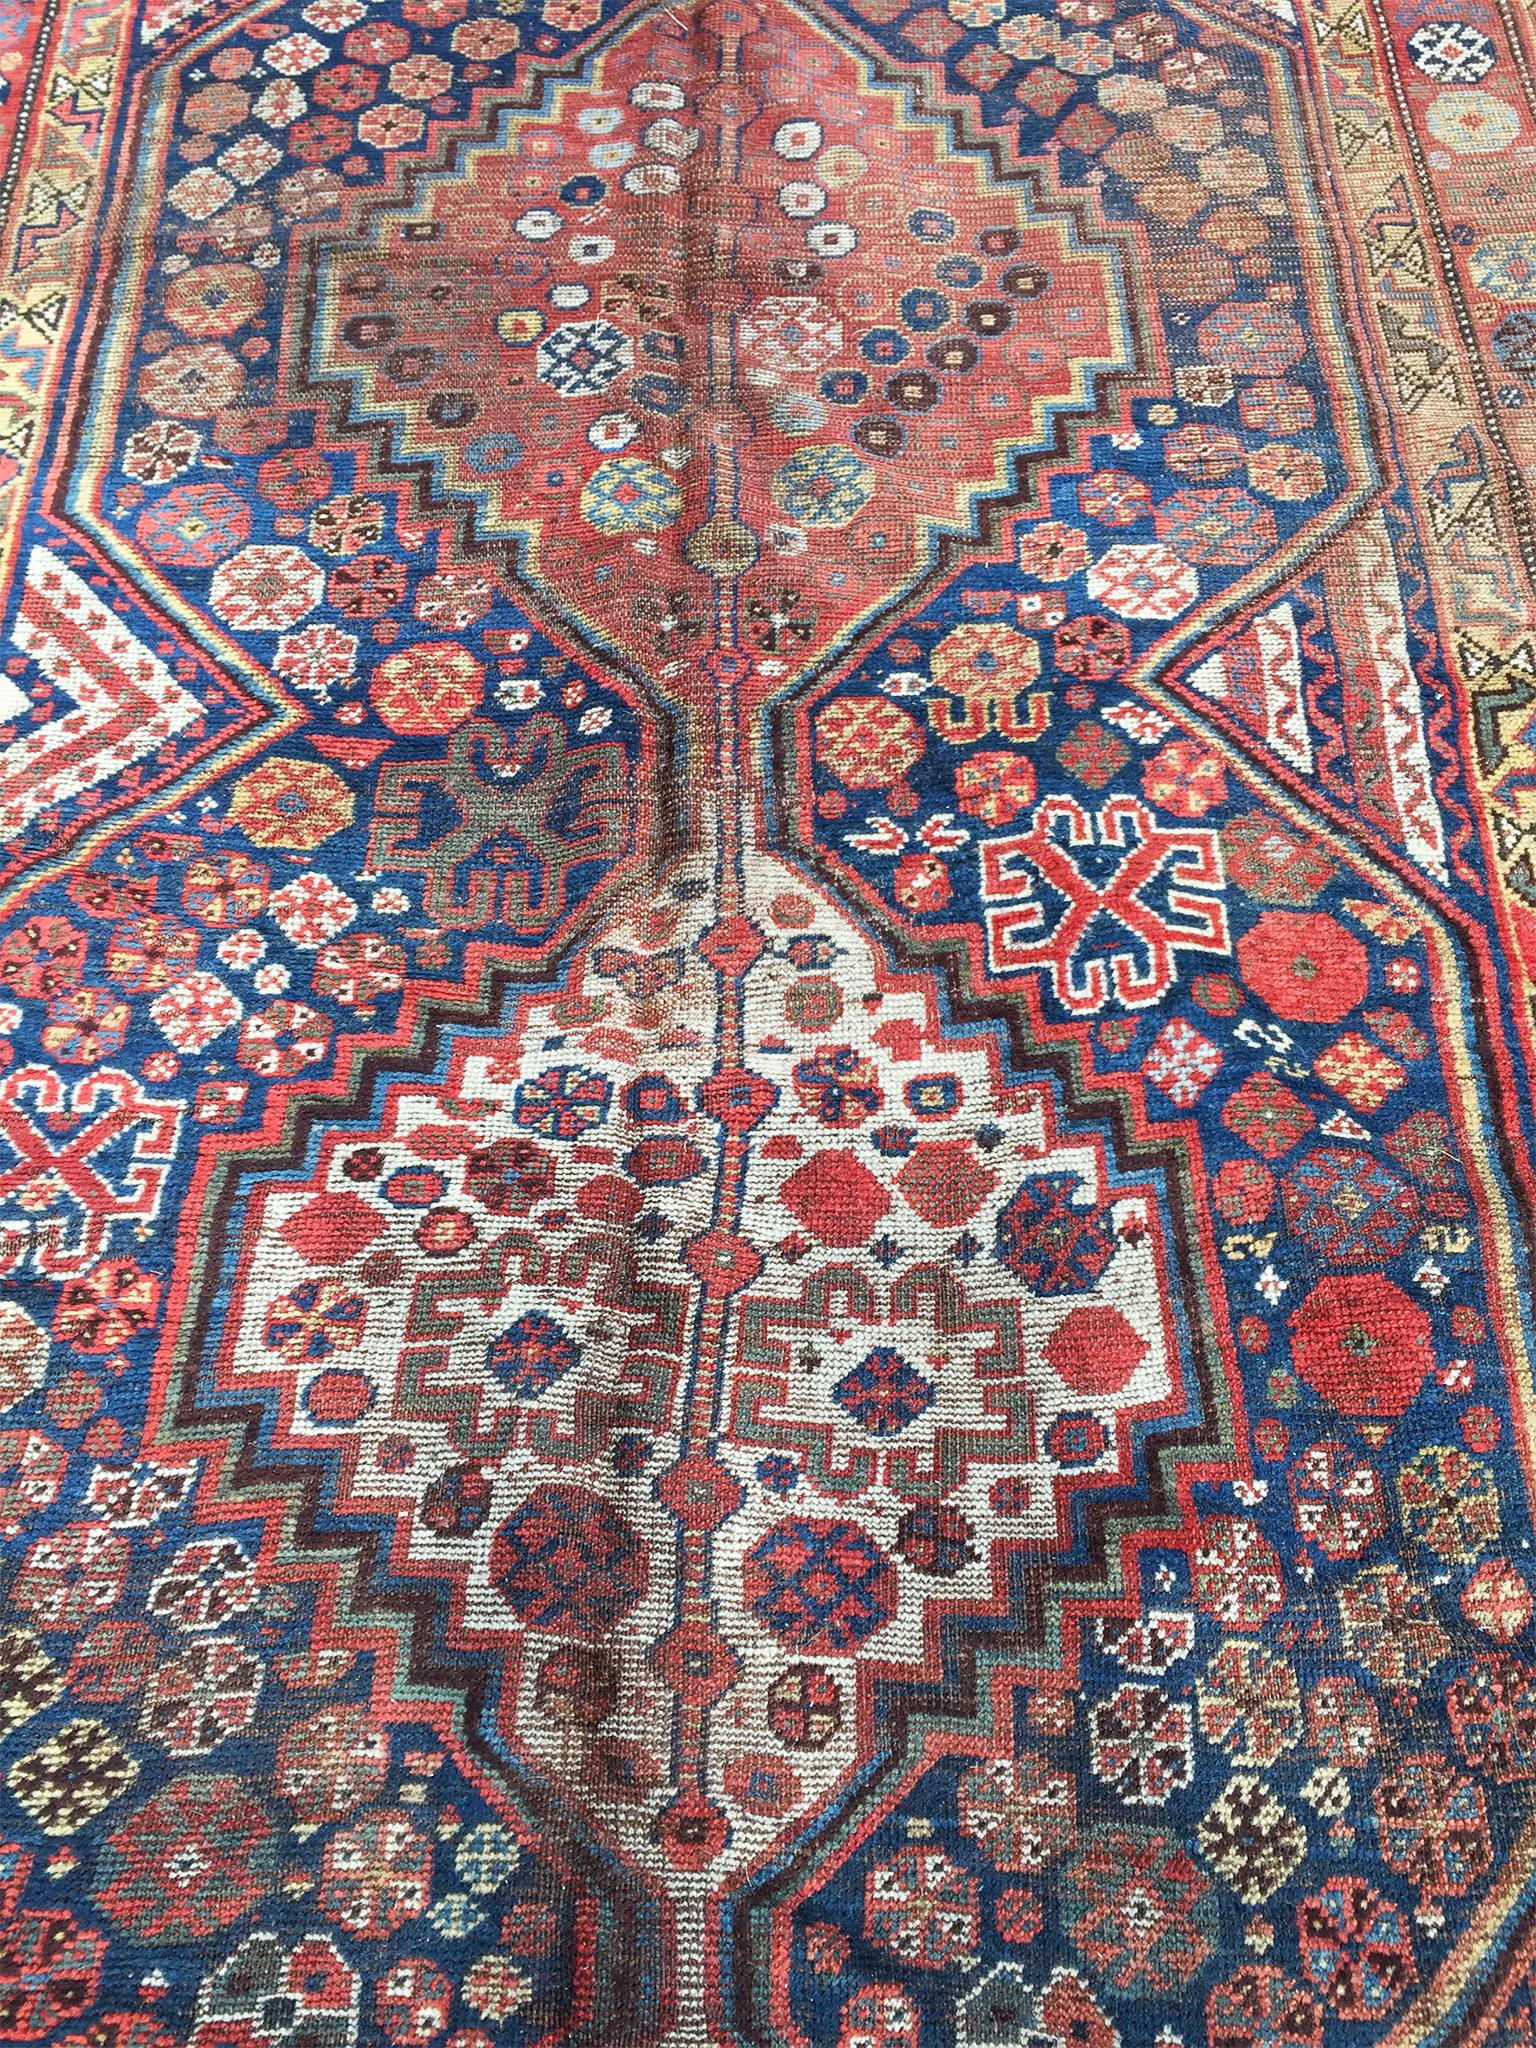 Dyed Early 20th Century Afshar Runner Rug